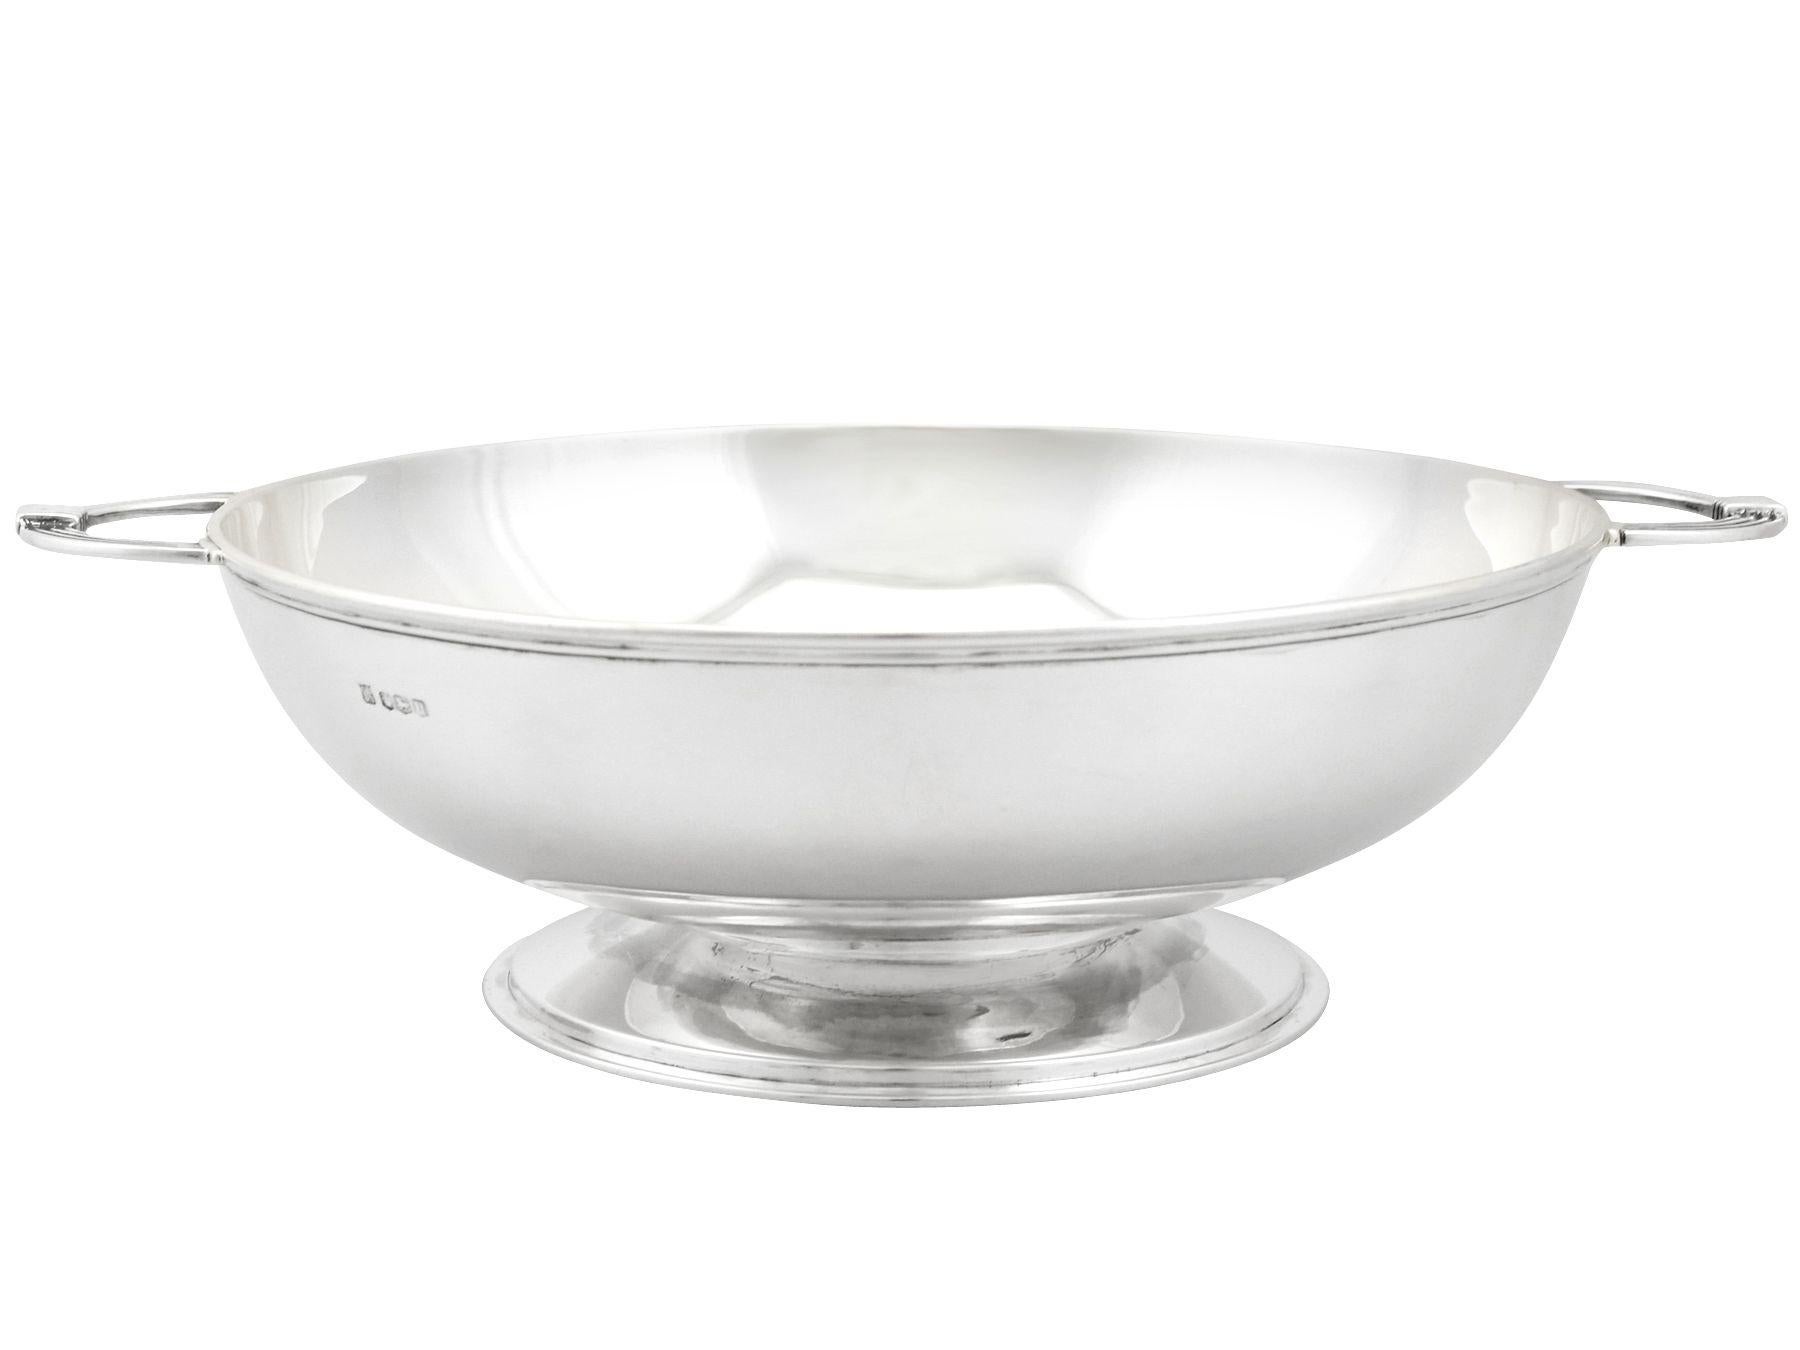 A fine and impressive antique George VI English sterling silver fruit bowl in the Art Deco style, an addition to our ornamental silverware collection.

This exceptional antique George VI English sterling silver bowl has a plain circular rounded